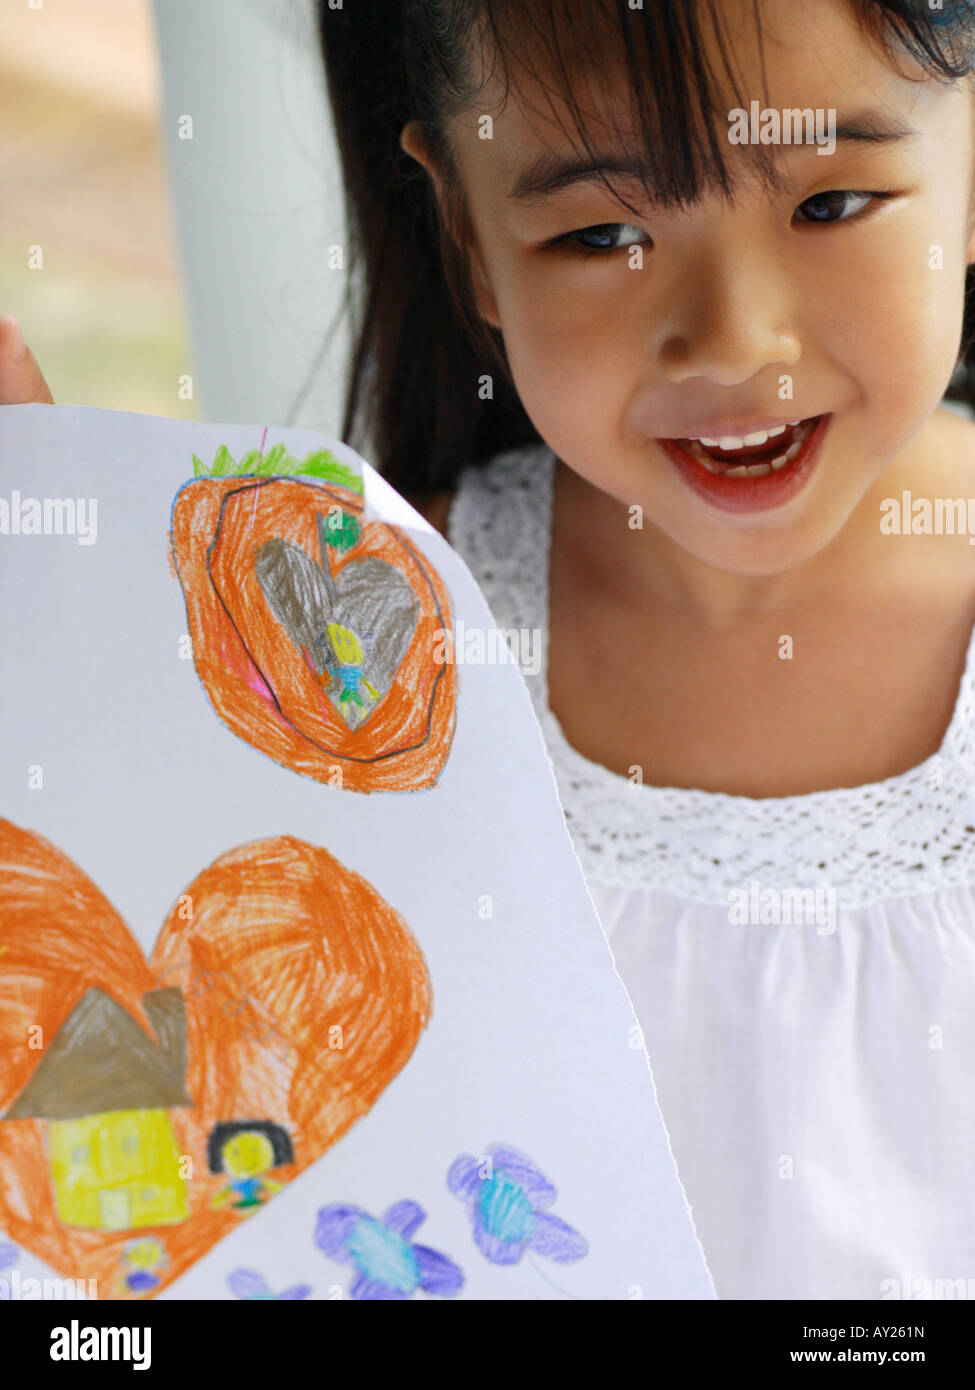 Close-up of a girl holding a crayon drawing Stock Photo